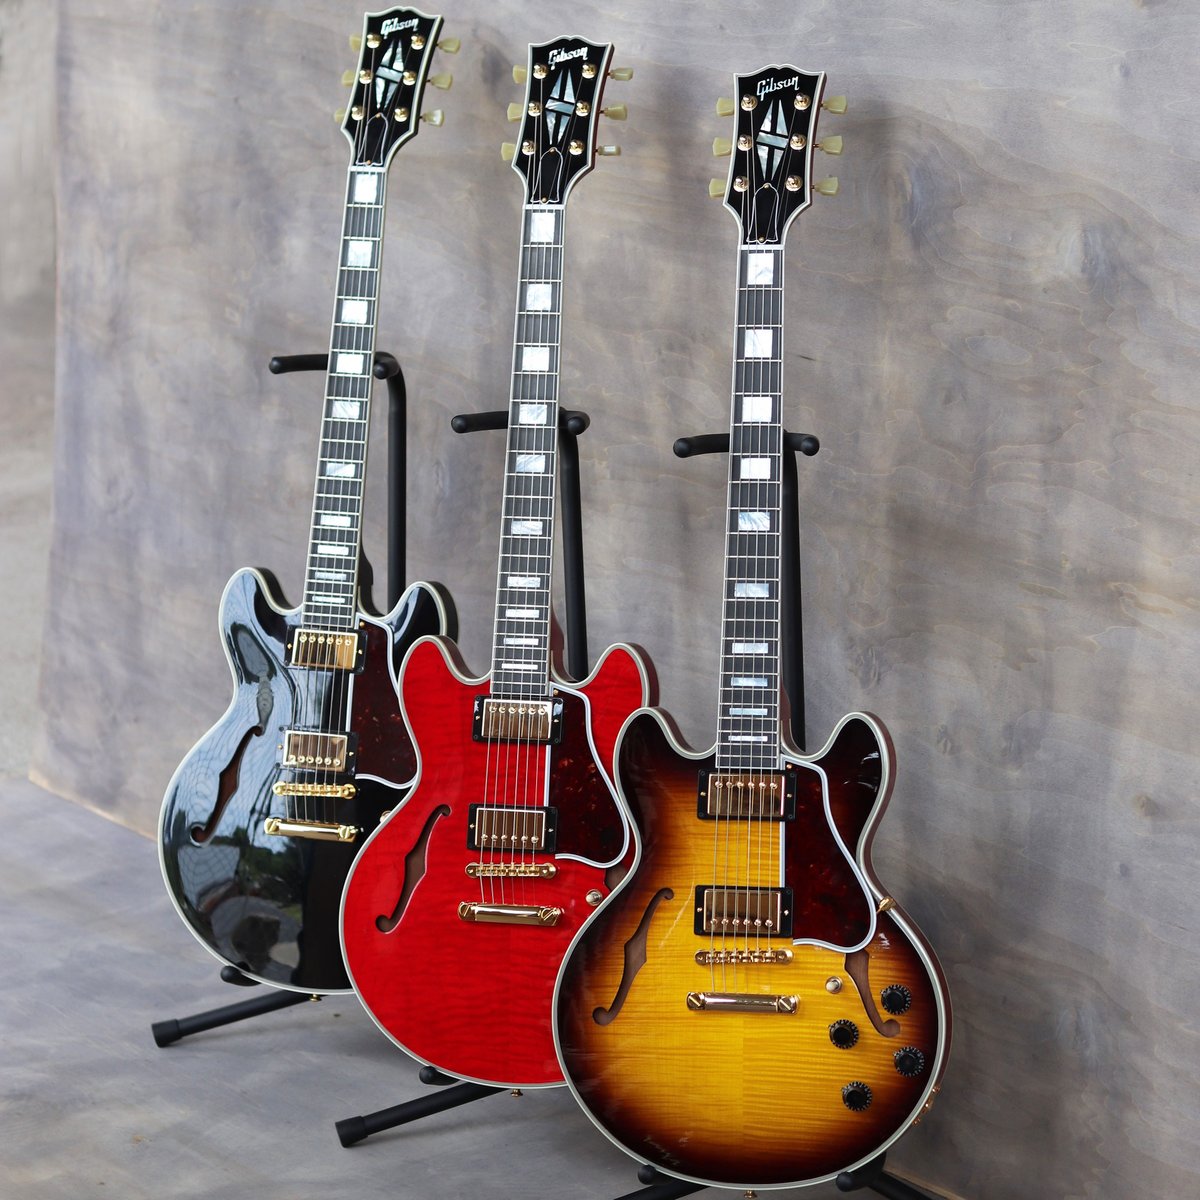 The Gibson Custom CS-356. These semi-hollowbodies are made from carved solid woods like an archtop. More info here: bit.ly/2vNE3JE